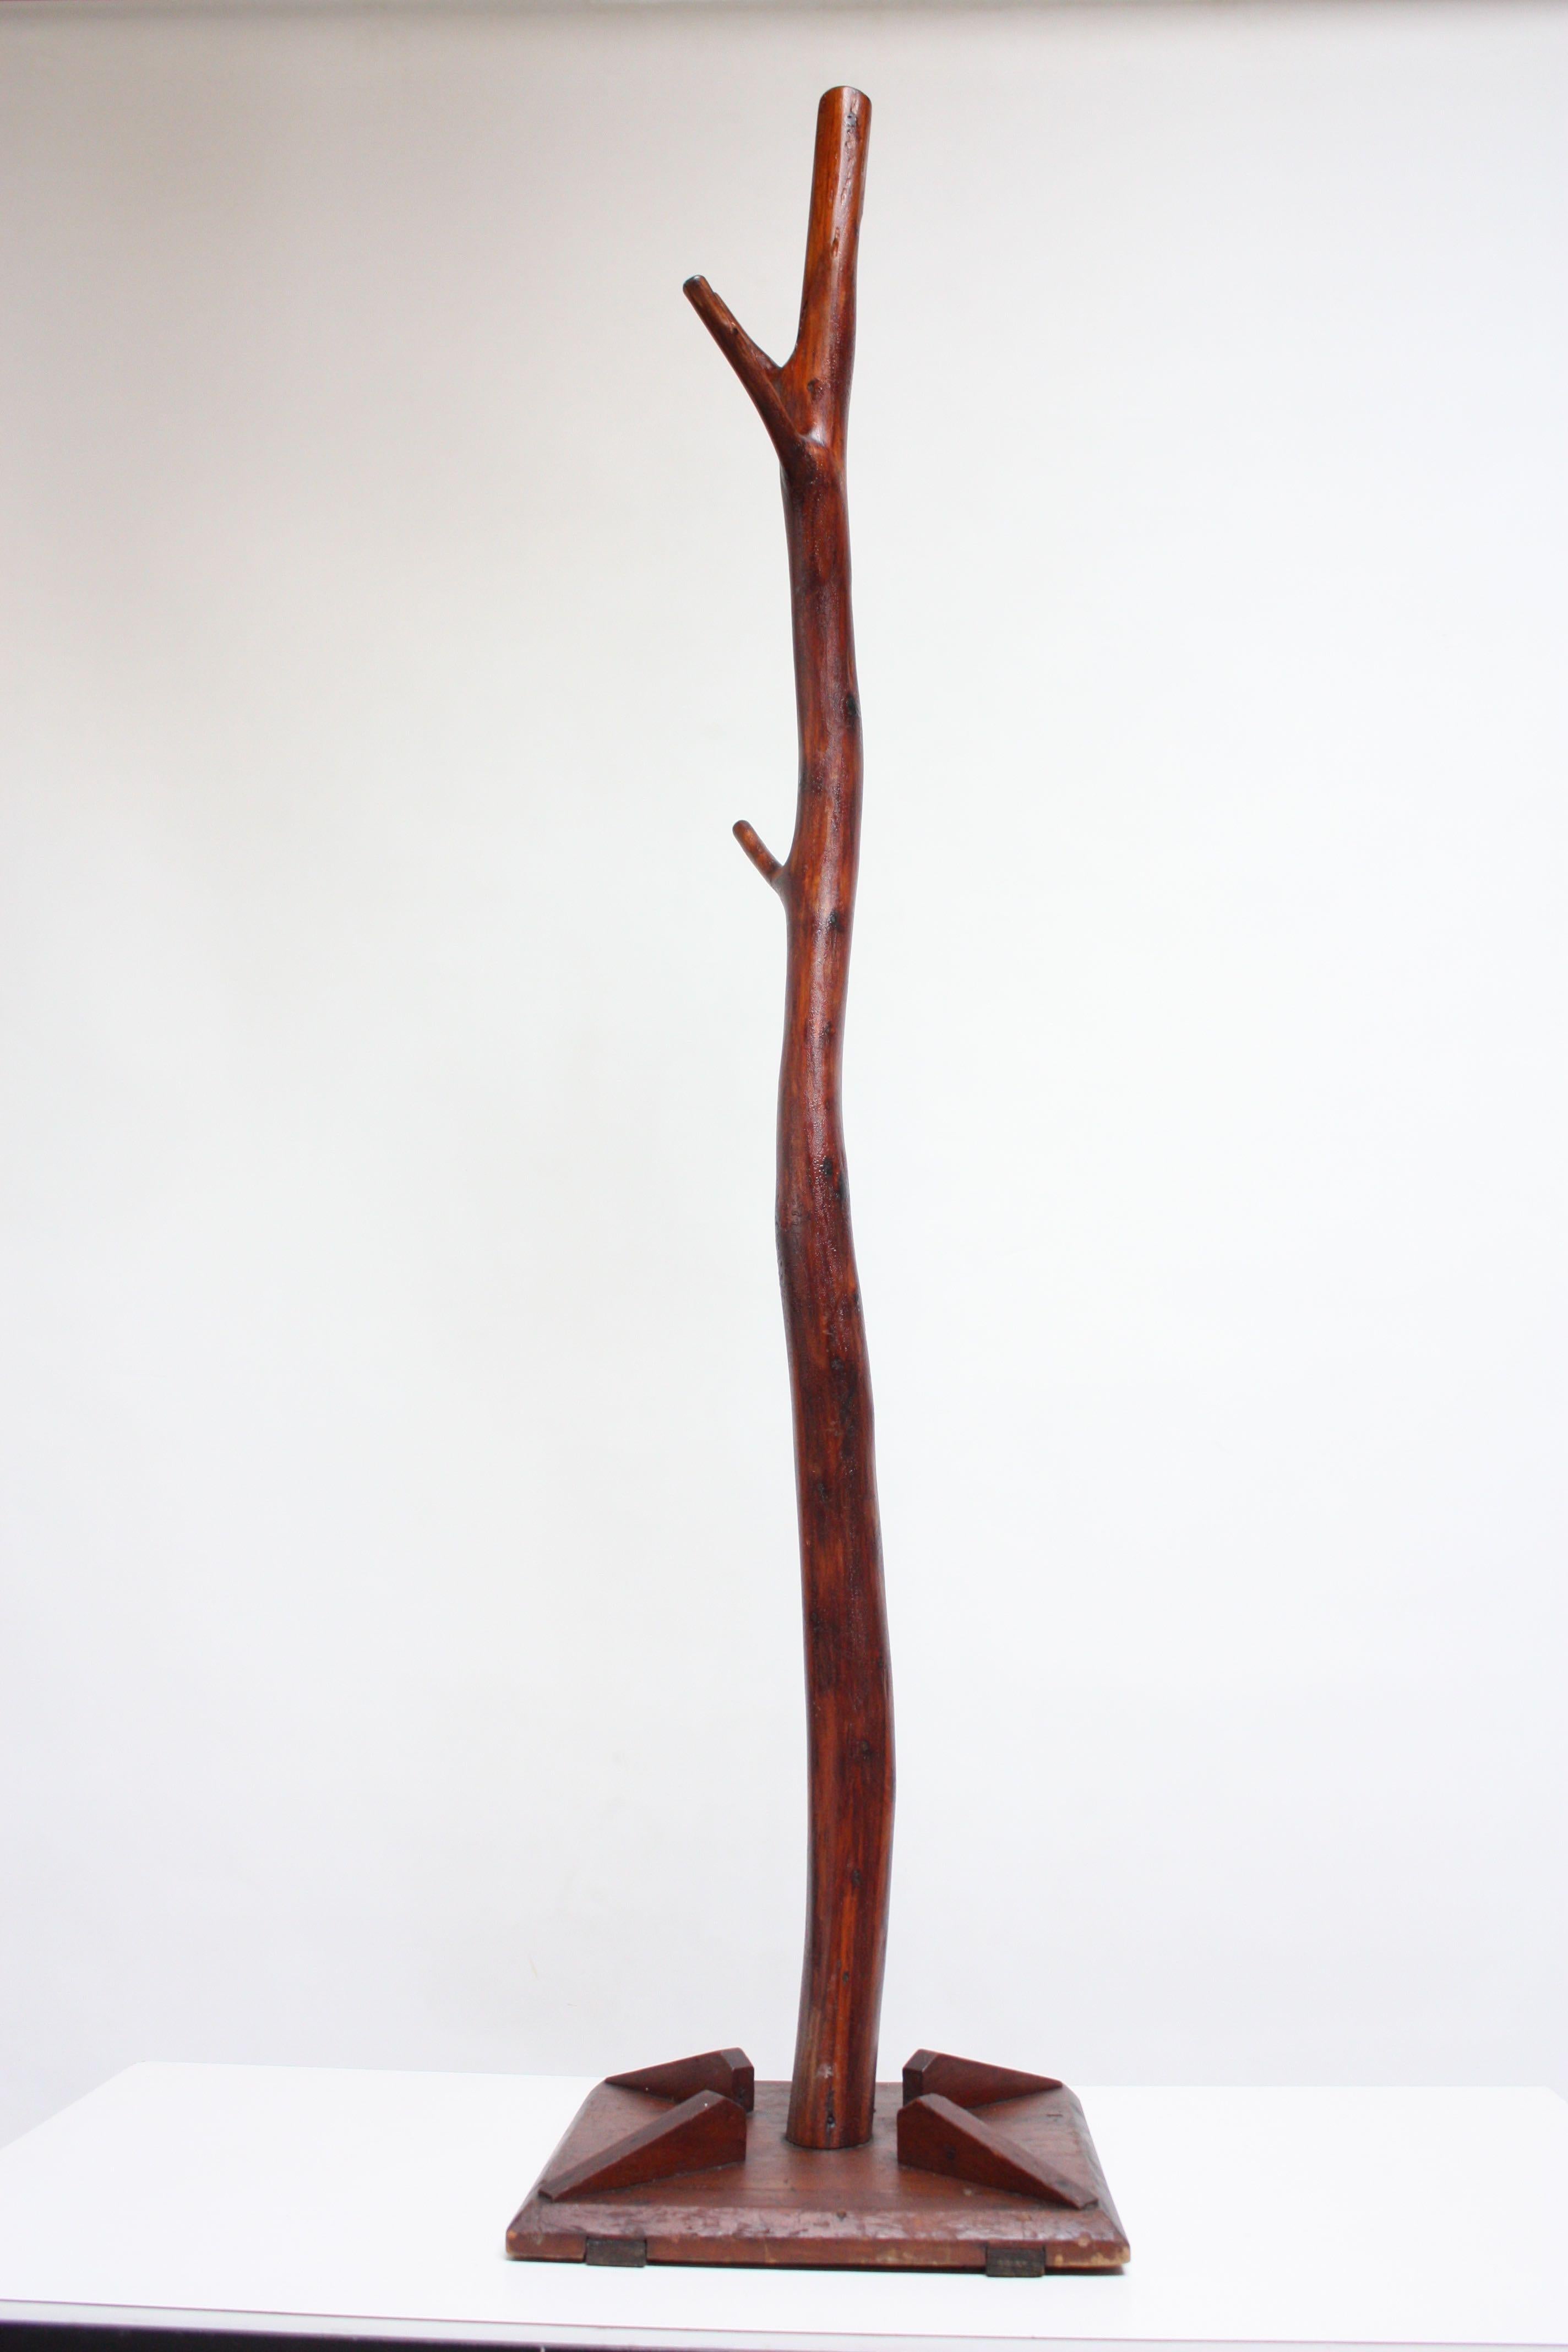 Impressive tree-form coat / hat rack, circa 1920s, composed of stained dry wood of an actual tree (likely cherry). Fitted to a carved wood base with carved decorative accents. Rich color and marvelous texture.